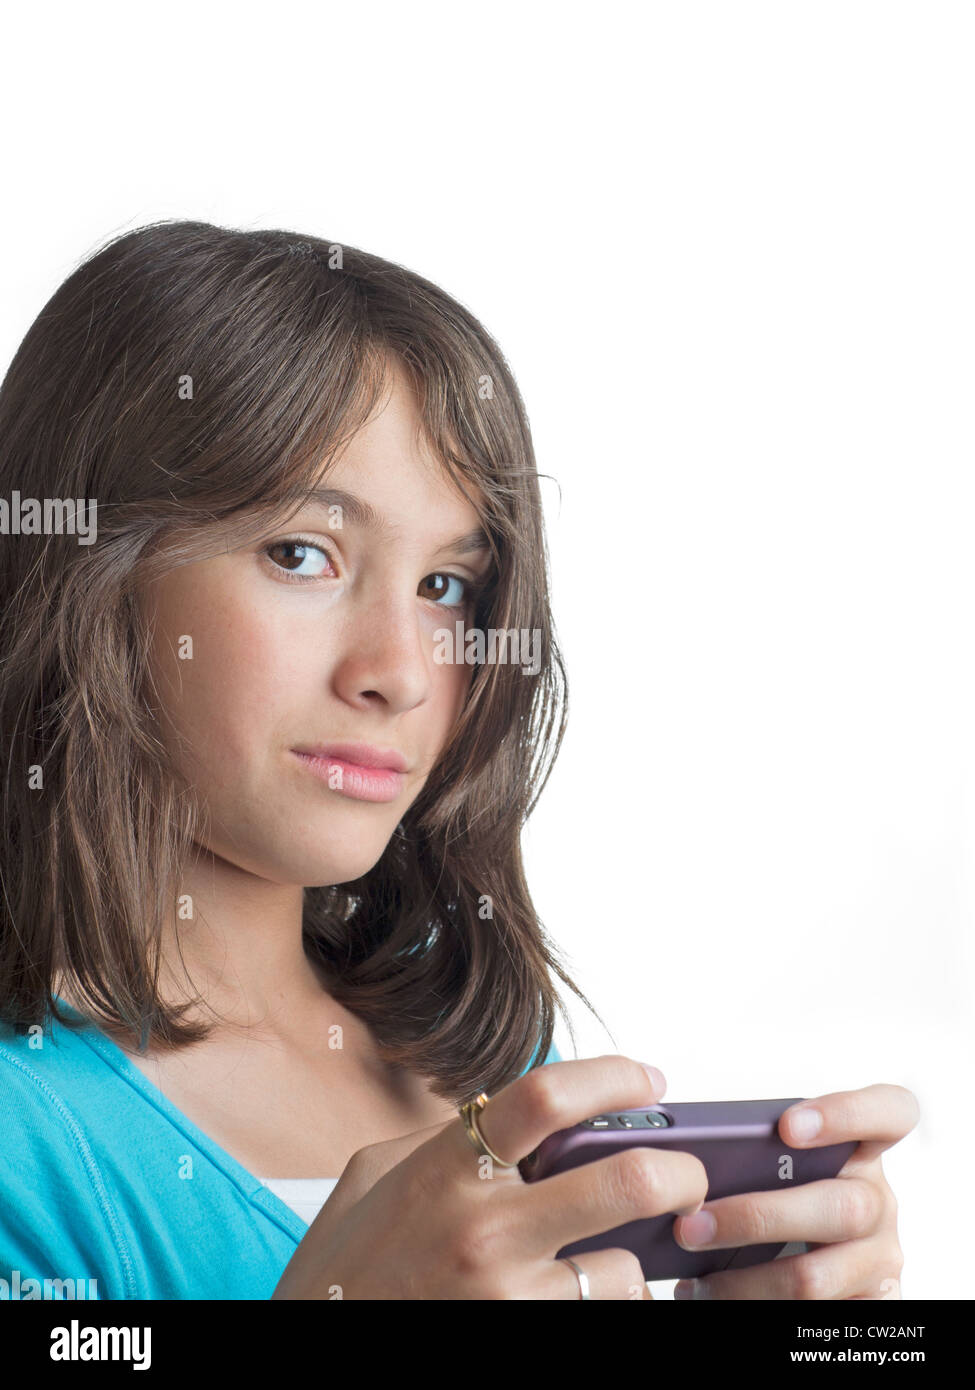 A young girl  in blue top texting isolated on white background Stock Photo